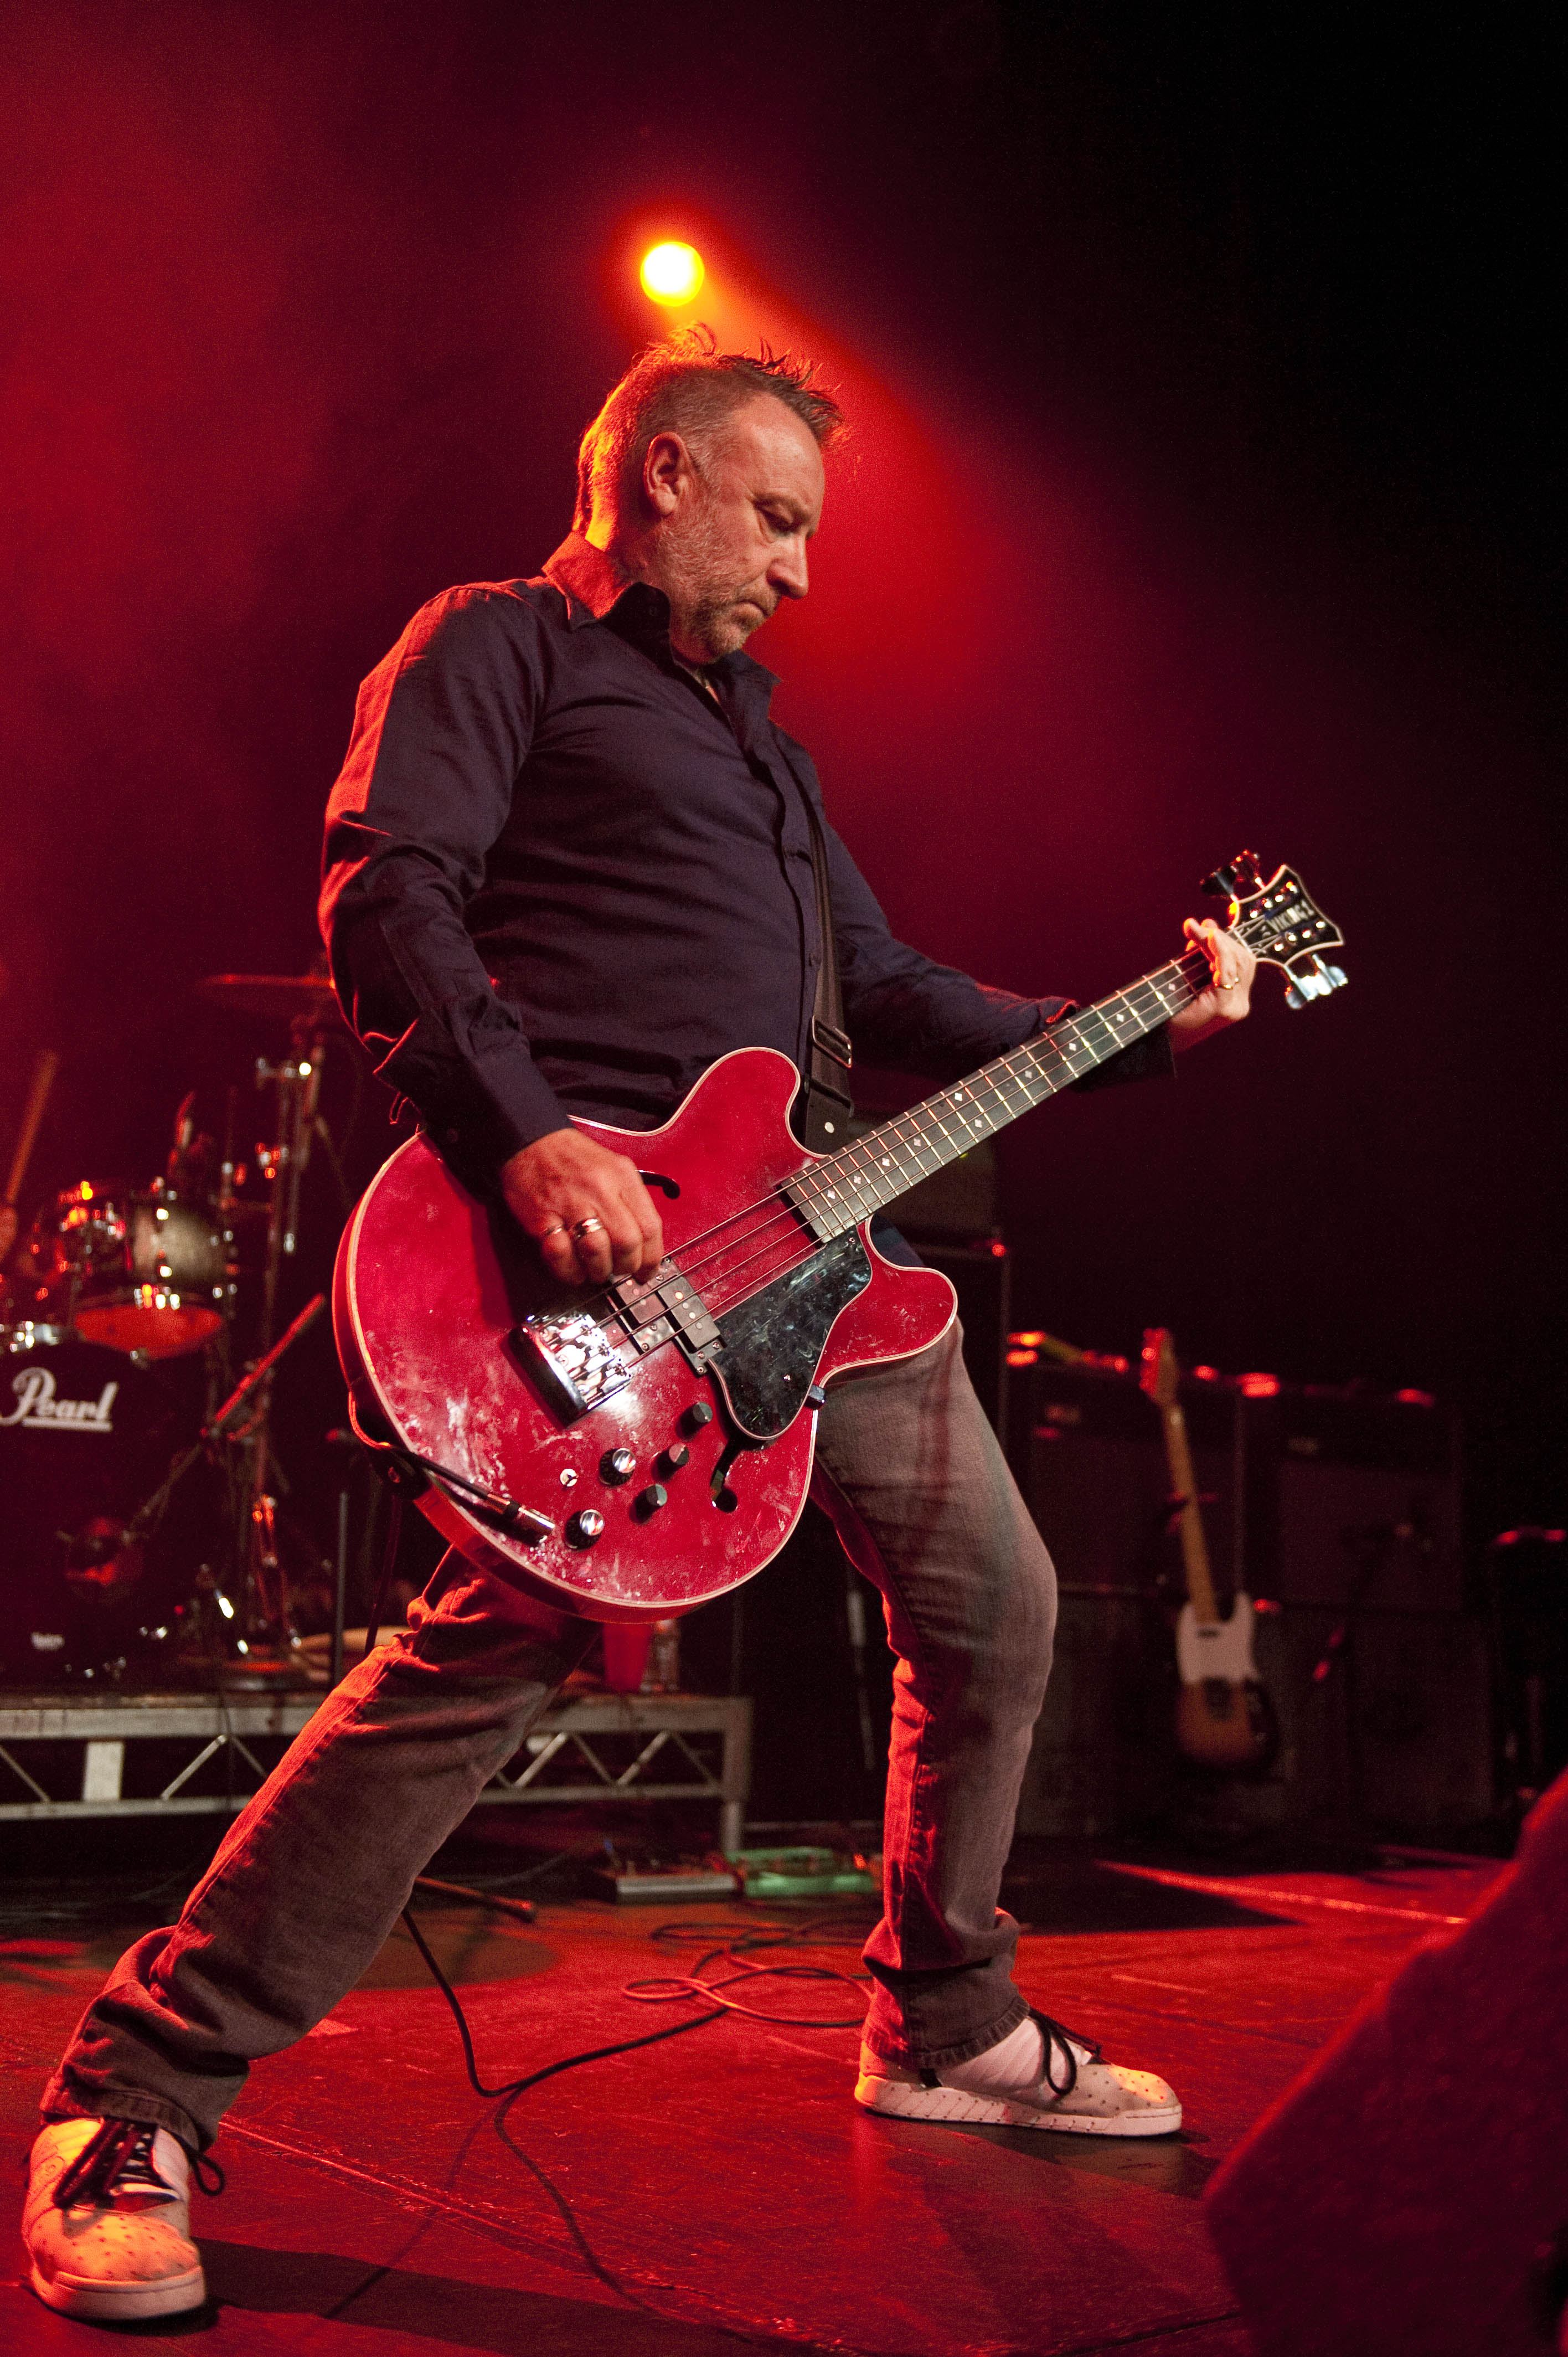 Peter Hook of Joy Division and New Order altered the course of pop music, go see him live